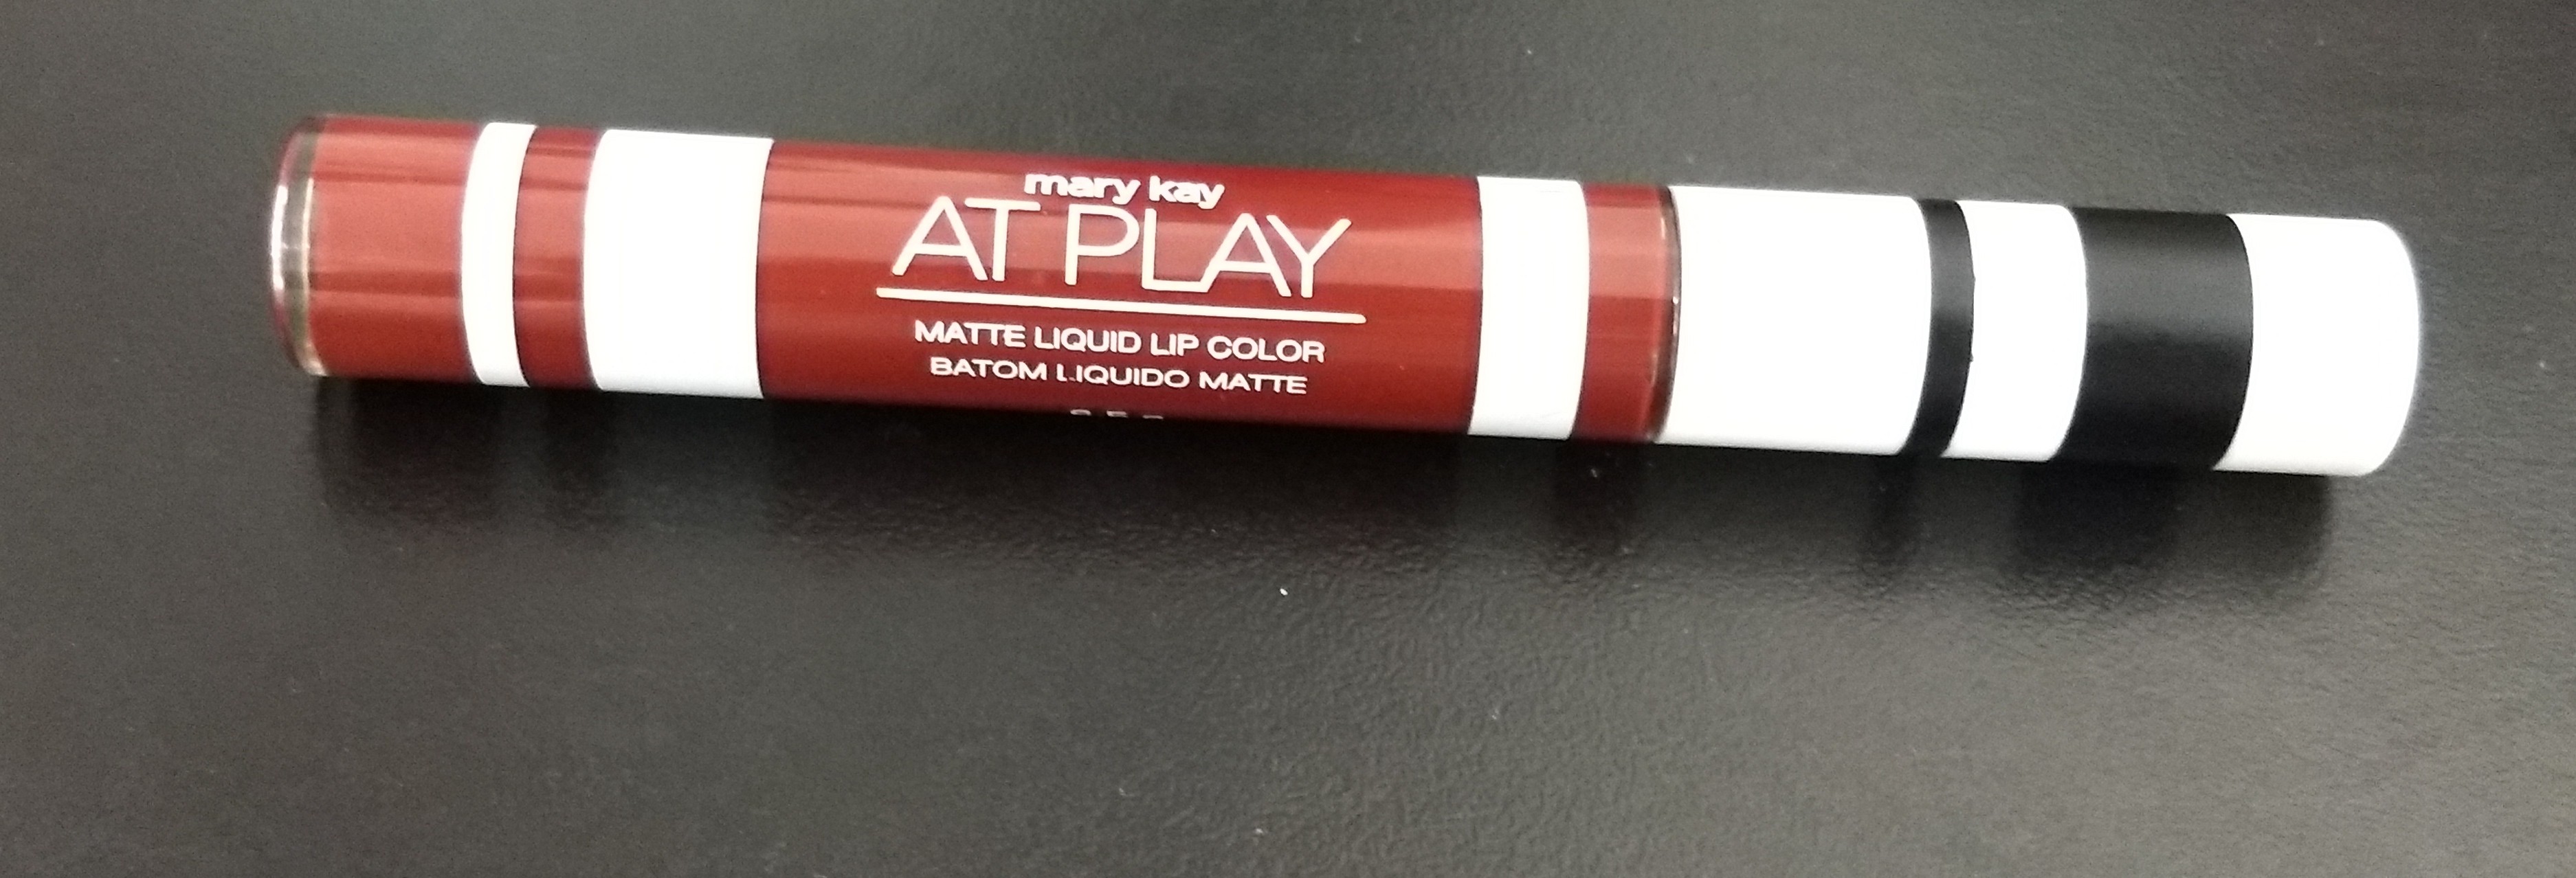 Batom Líquido Matte At Play (Spicy Red), Mary Kay (Foto: acervo pessoal)